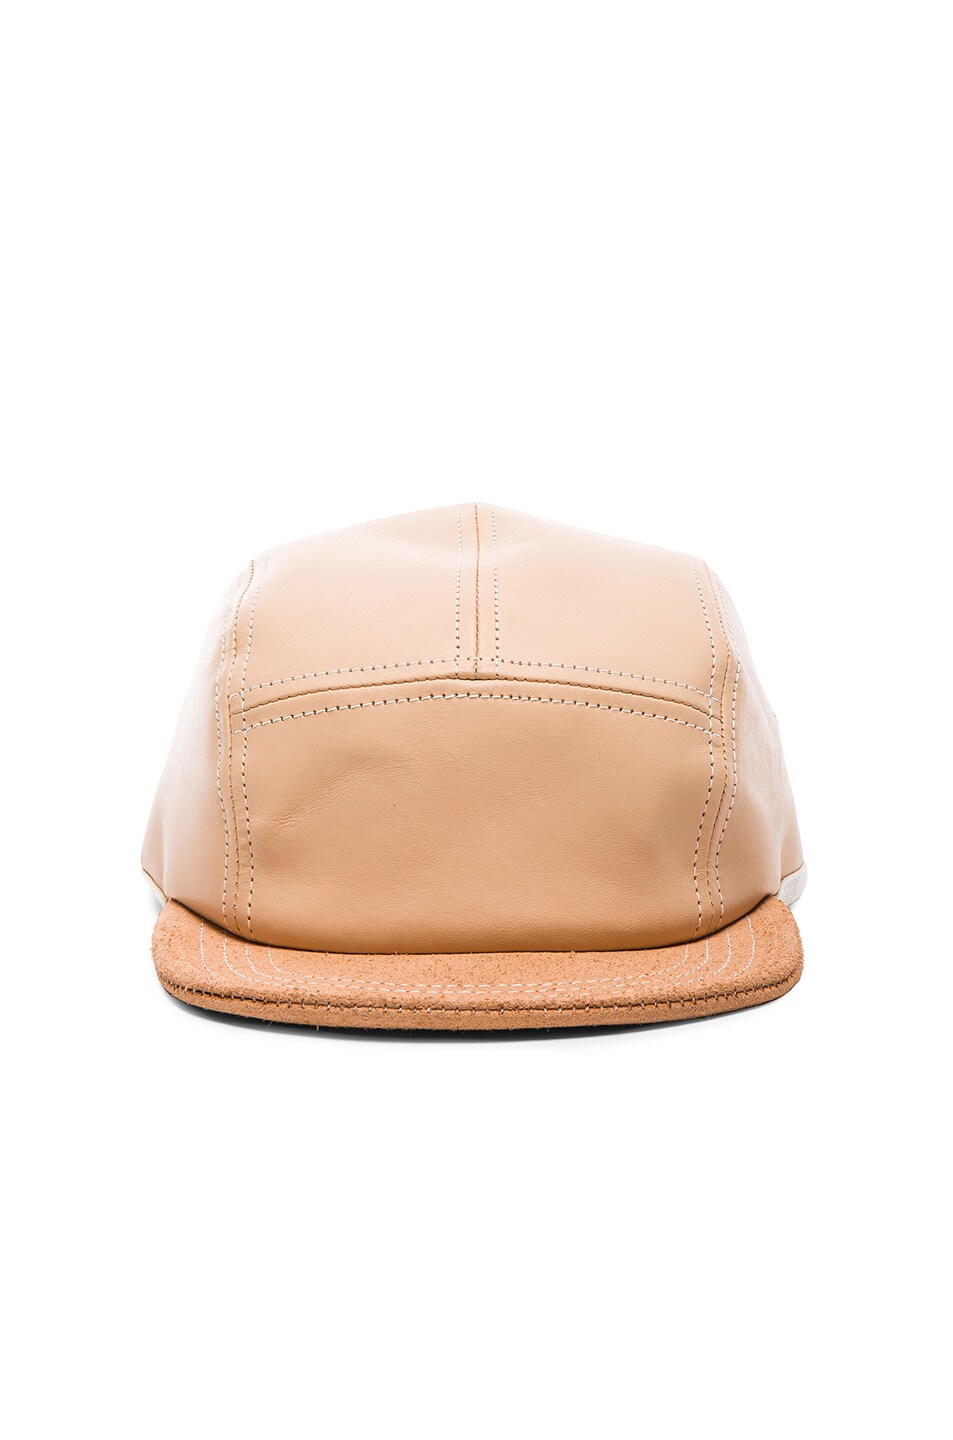 Image 1 of Hender Scheme Leather Cap in Natural